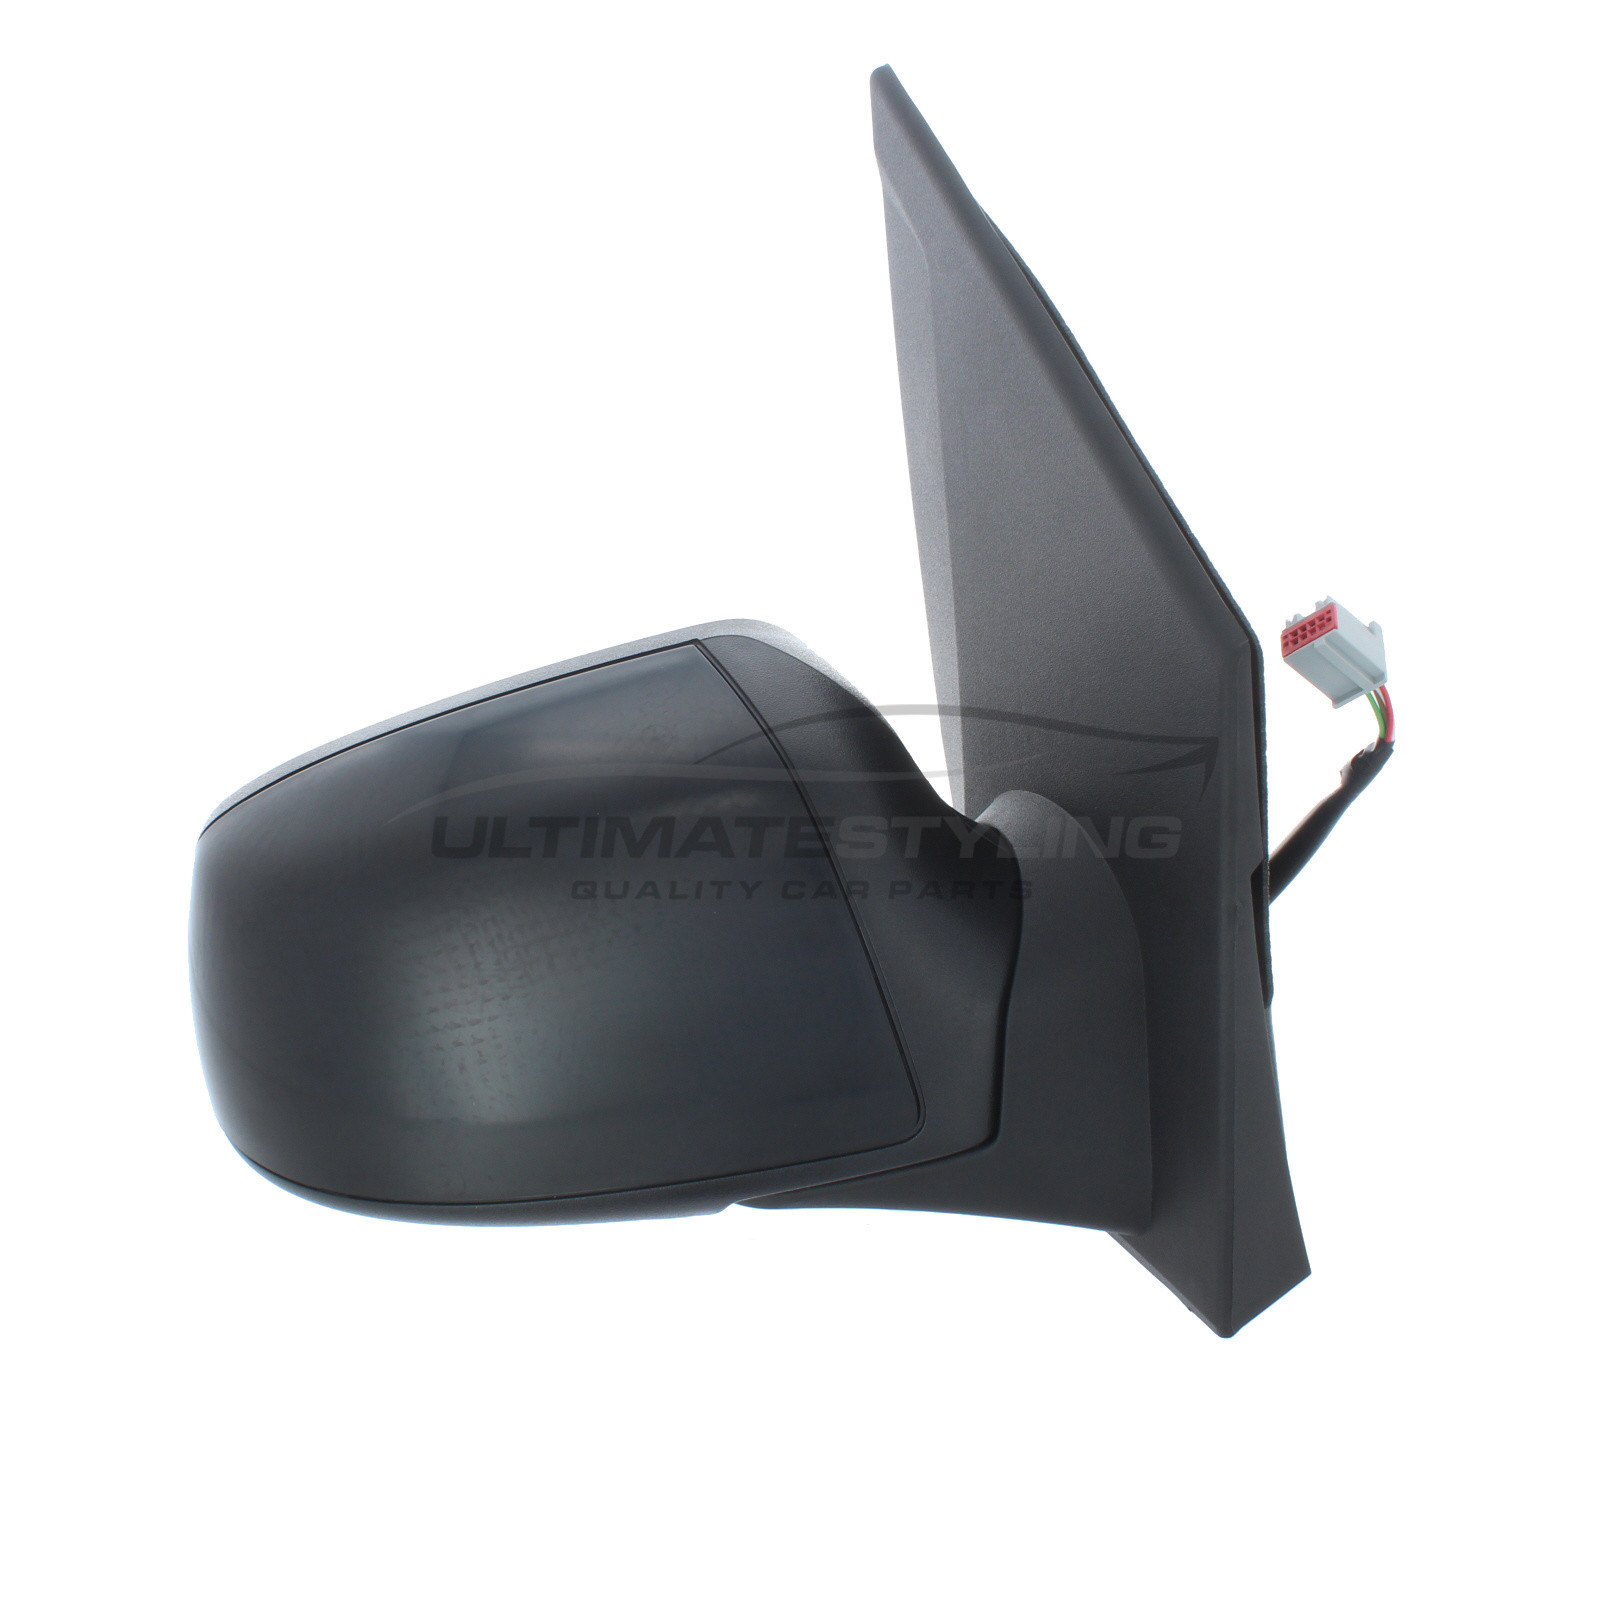 Ford Fiesta Wing Mirror / Door Mirror - Drivers Side (RH) - Electric adjustment - Heated Glass - Paintable - Black